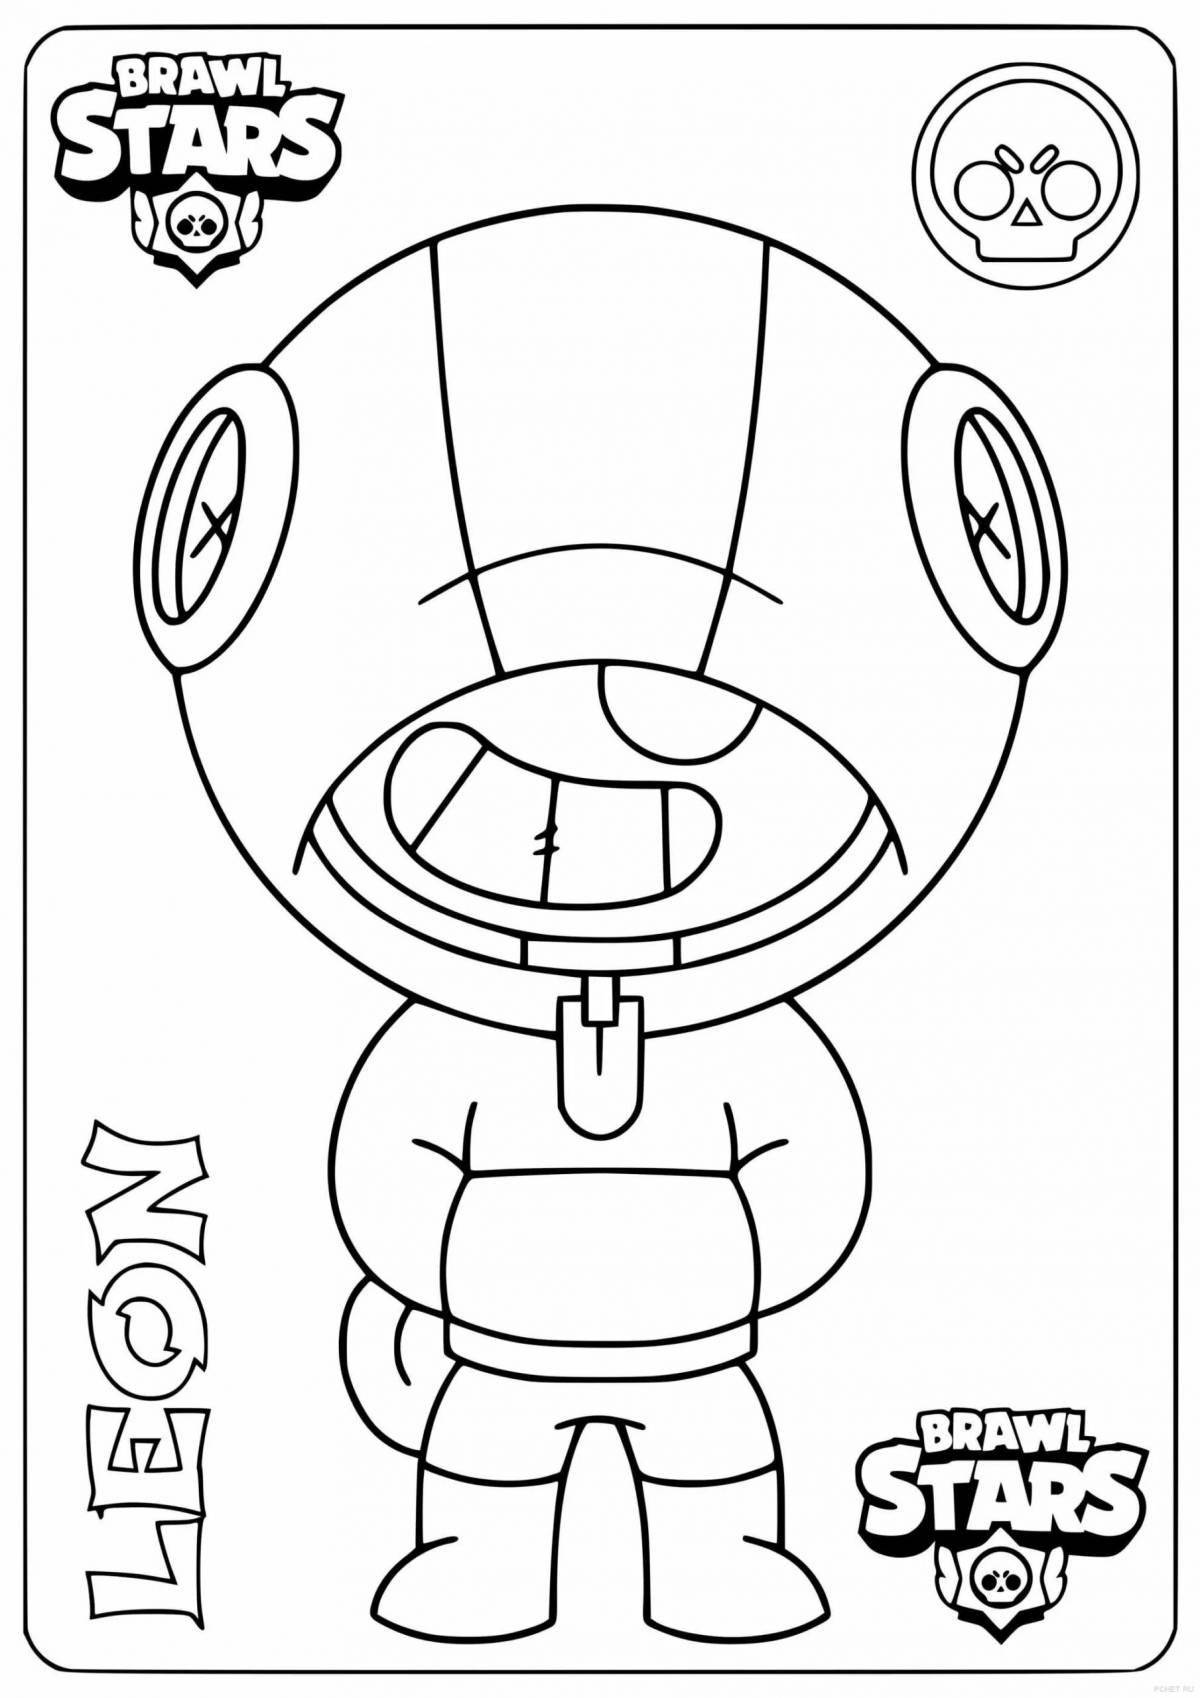 Dazzling leon and raven coloring book